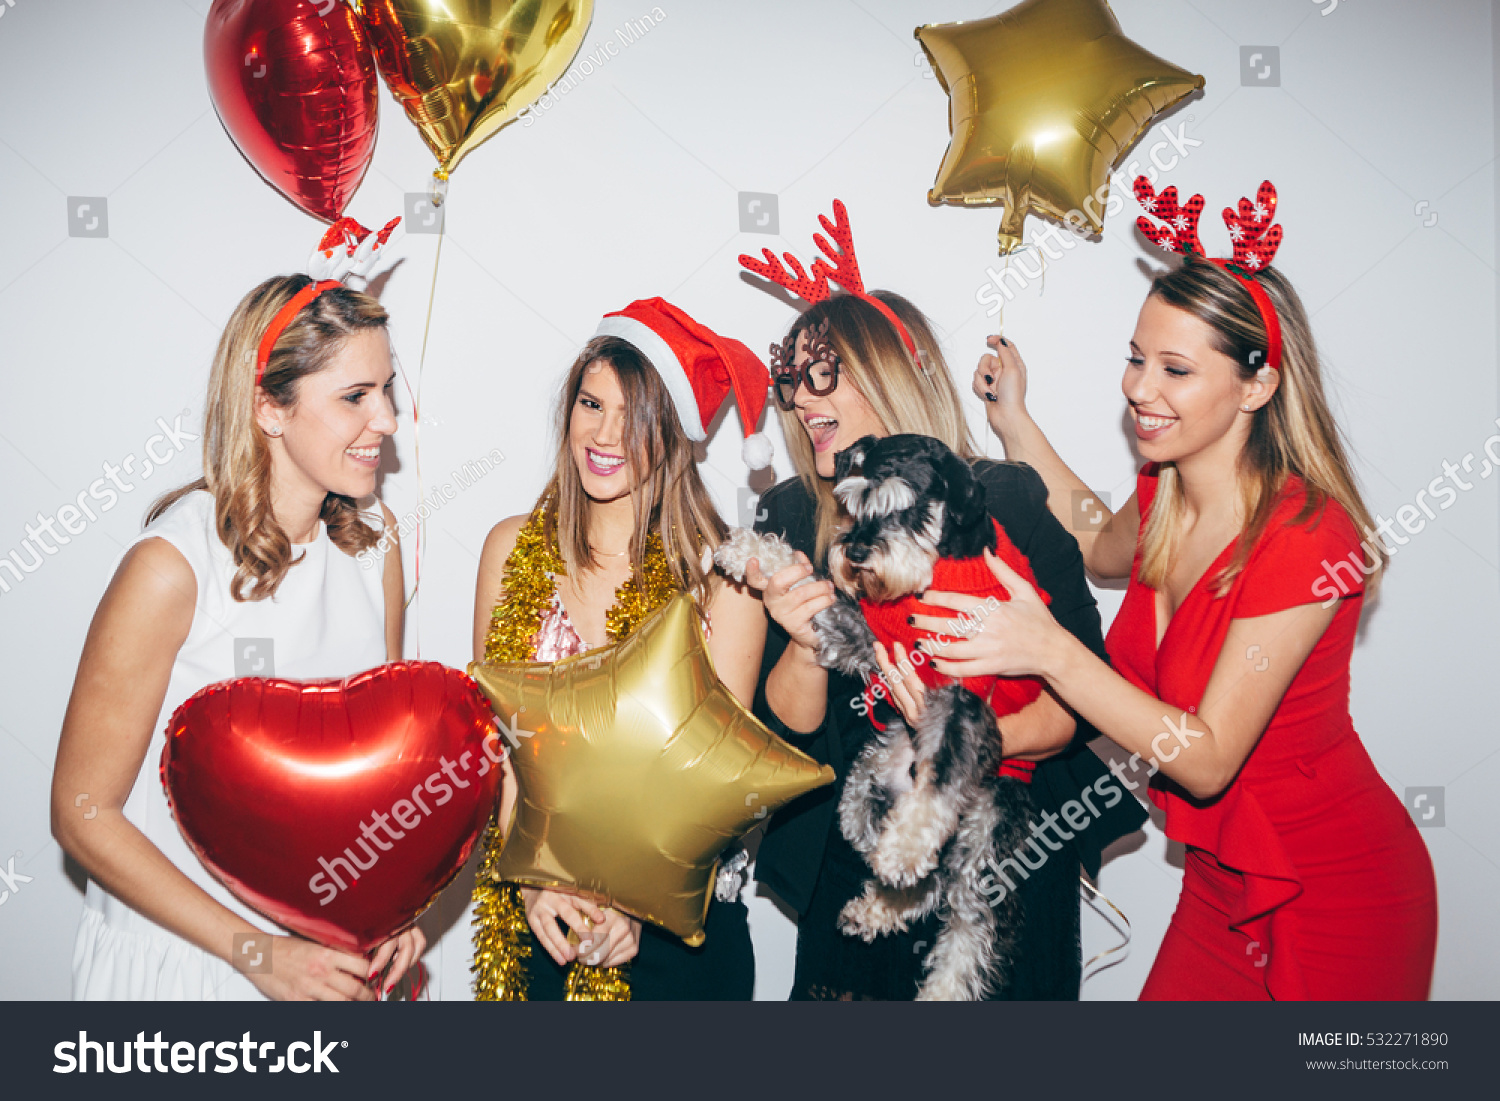 Four young woman celebrating and having fun. New year's party #532271890